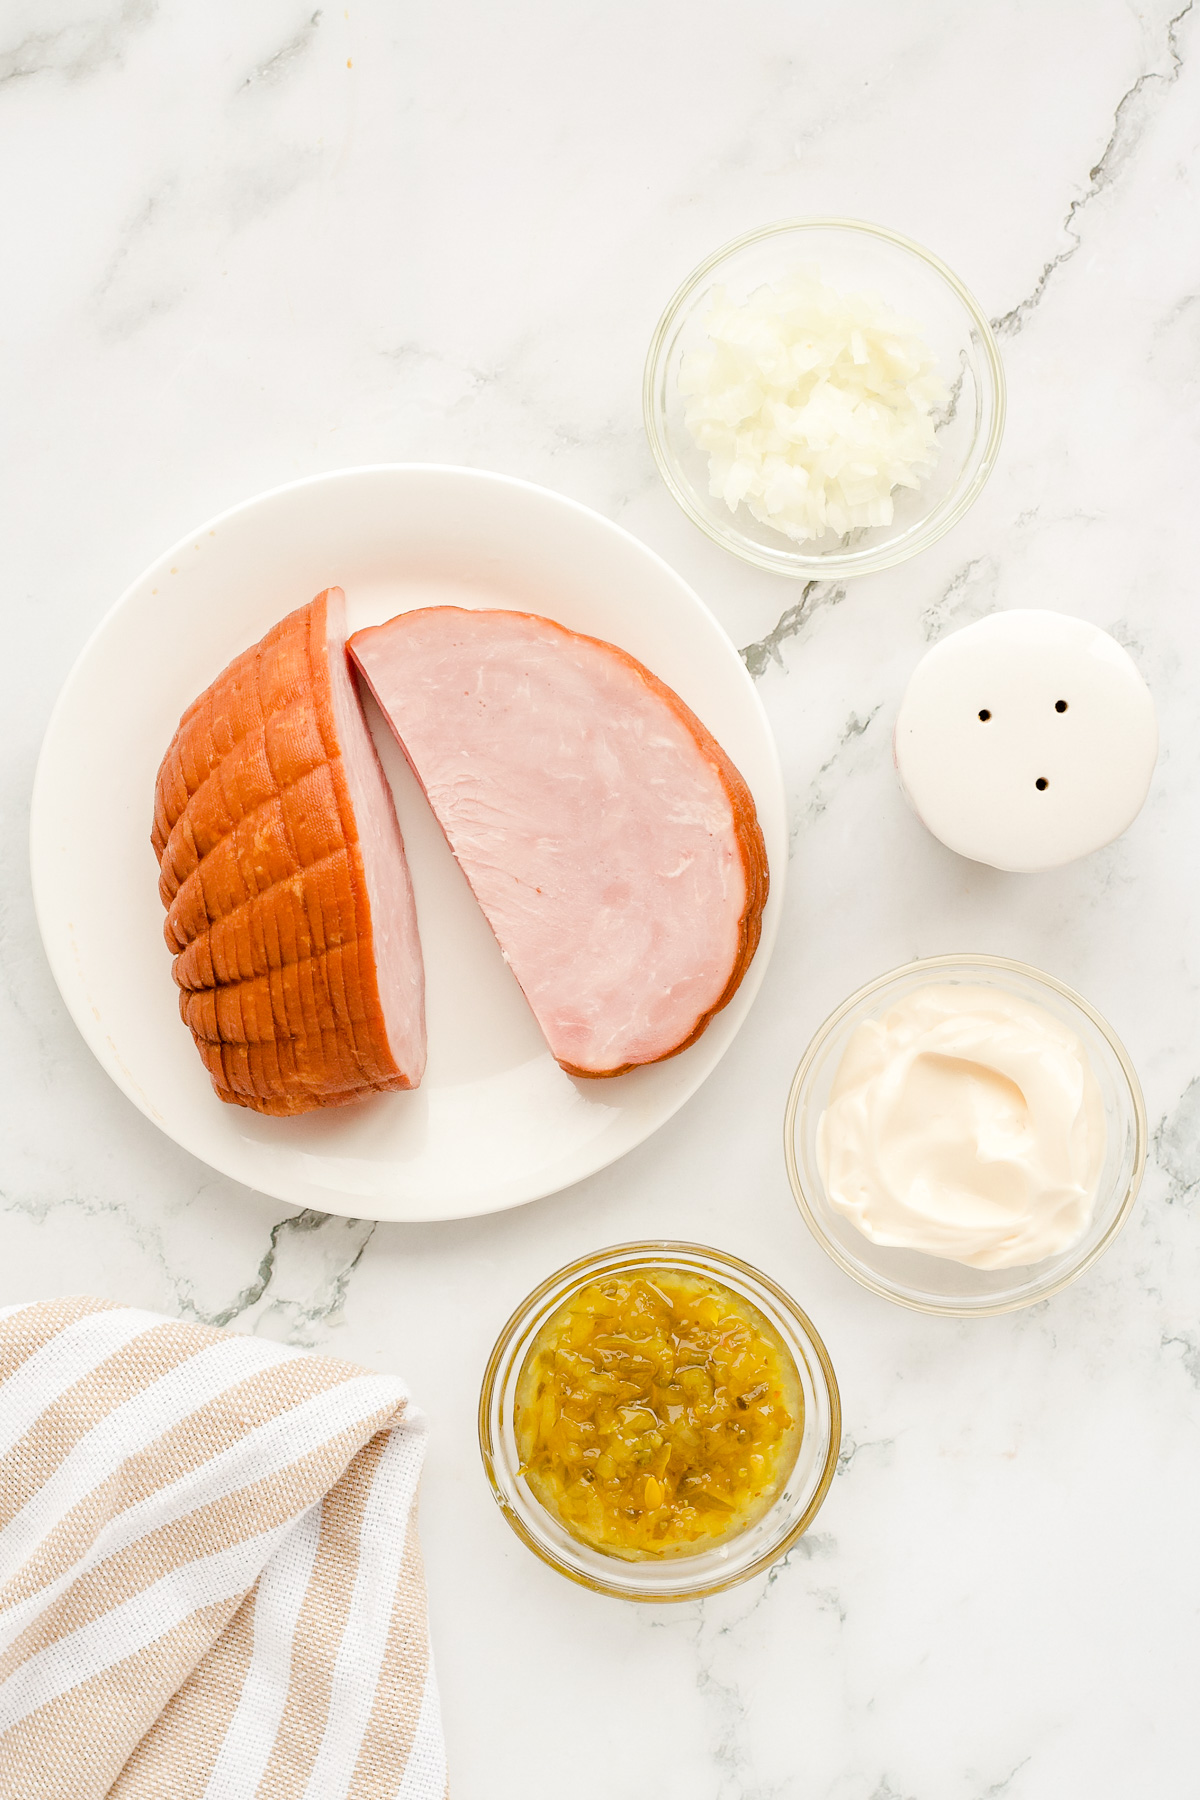 Ham salad ingredients laid out on countertop